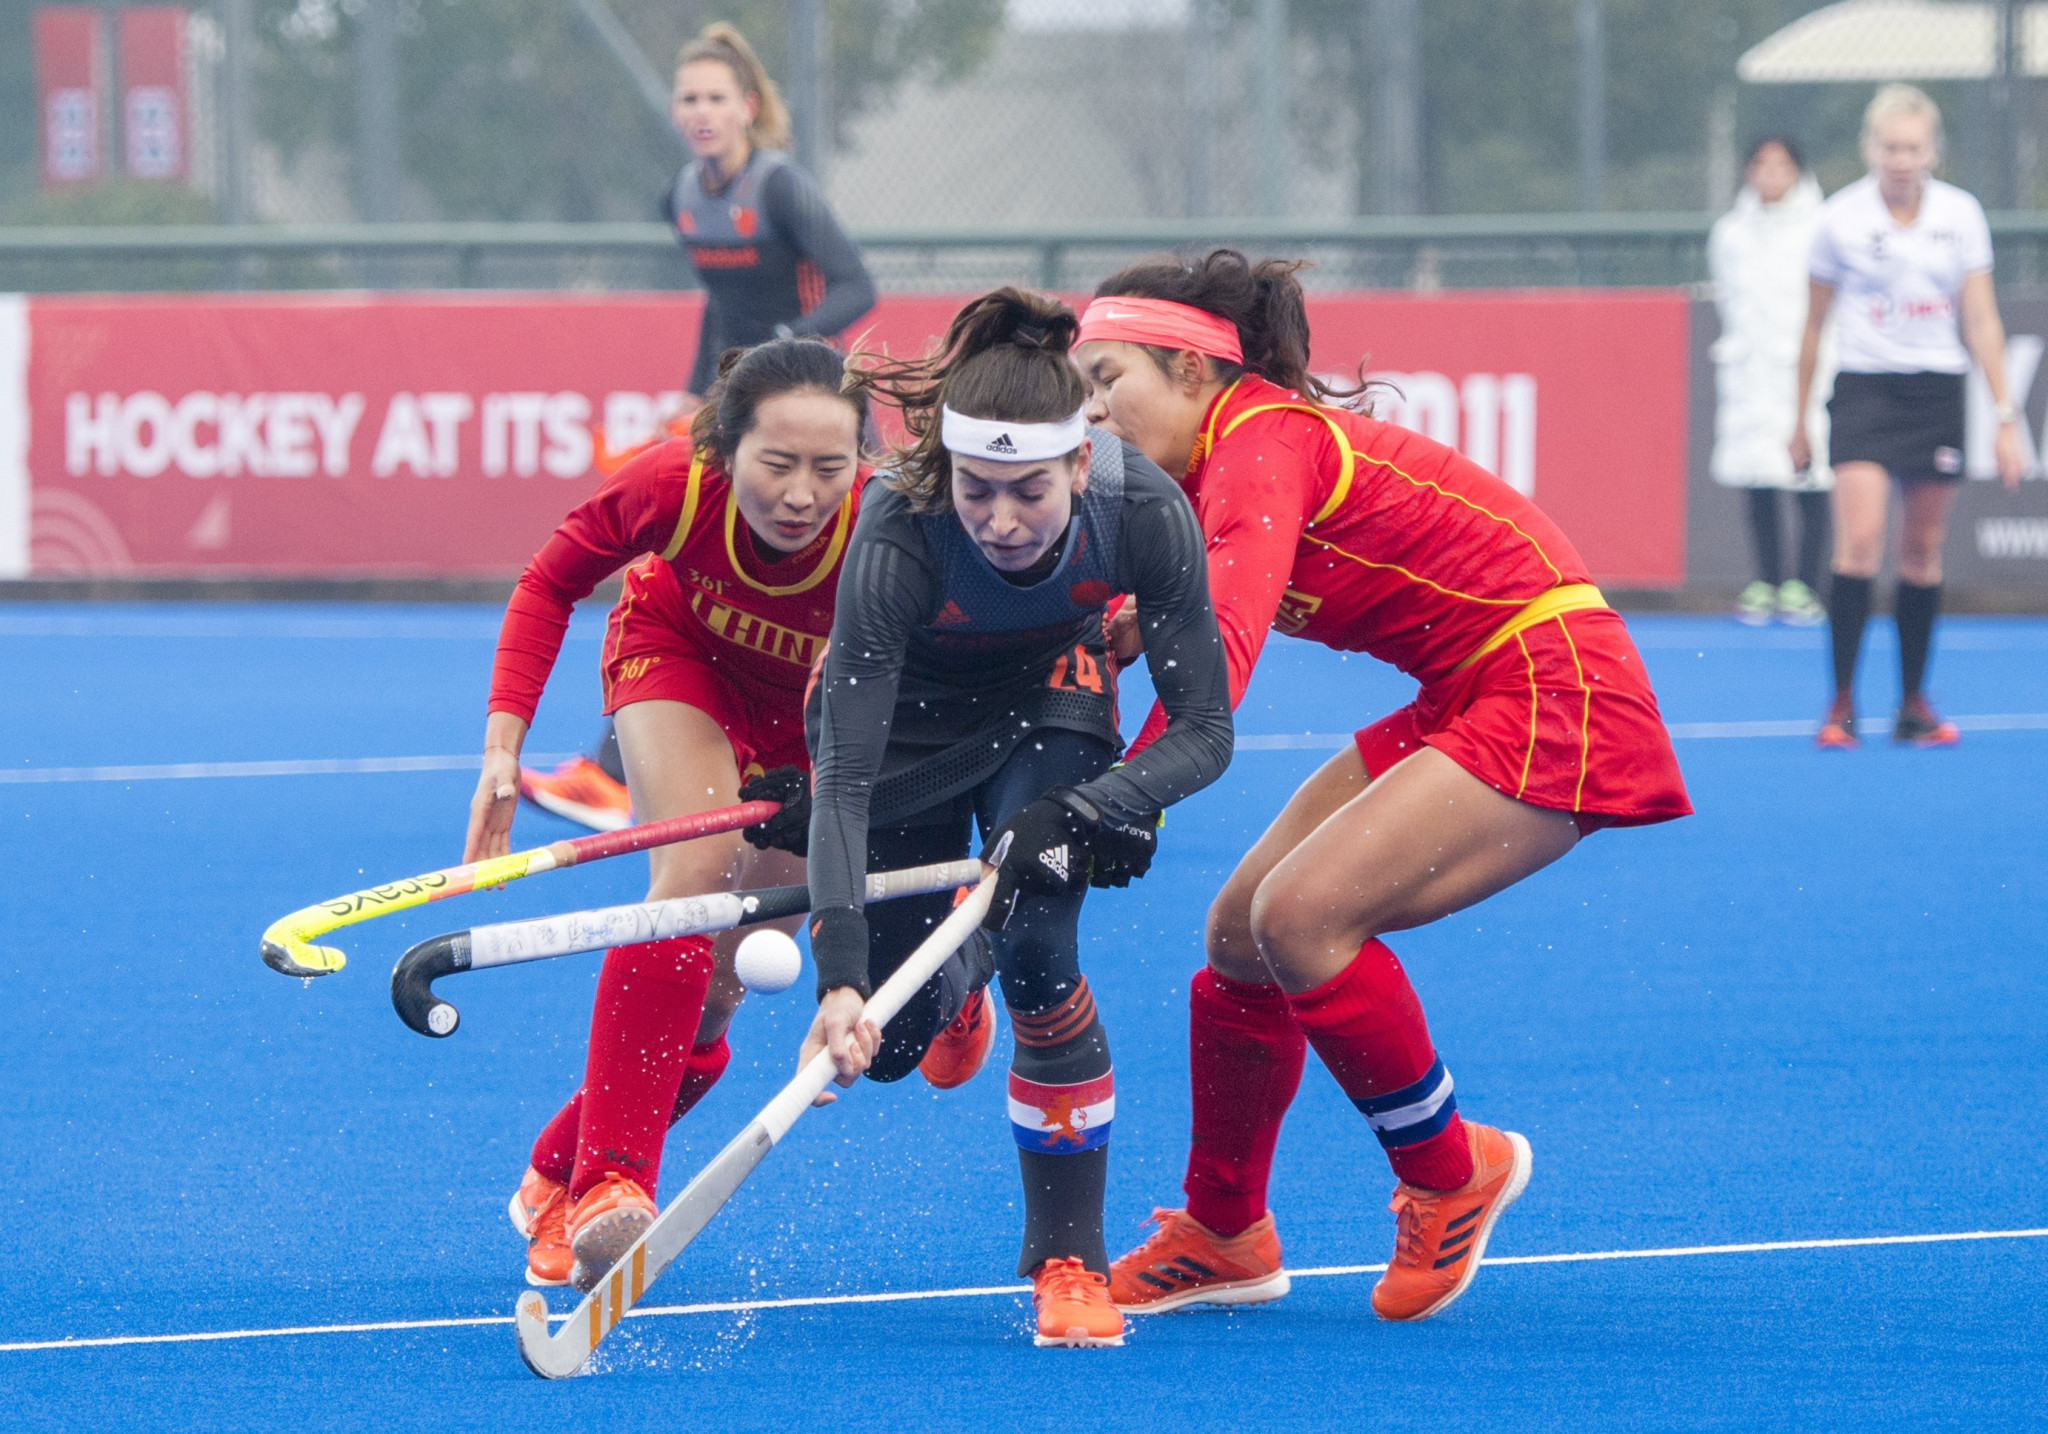 The Netherlands completed the double over China ©FIH